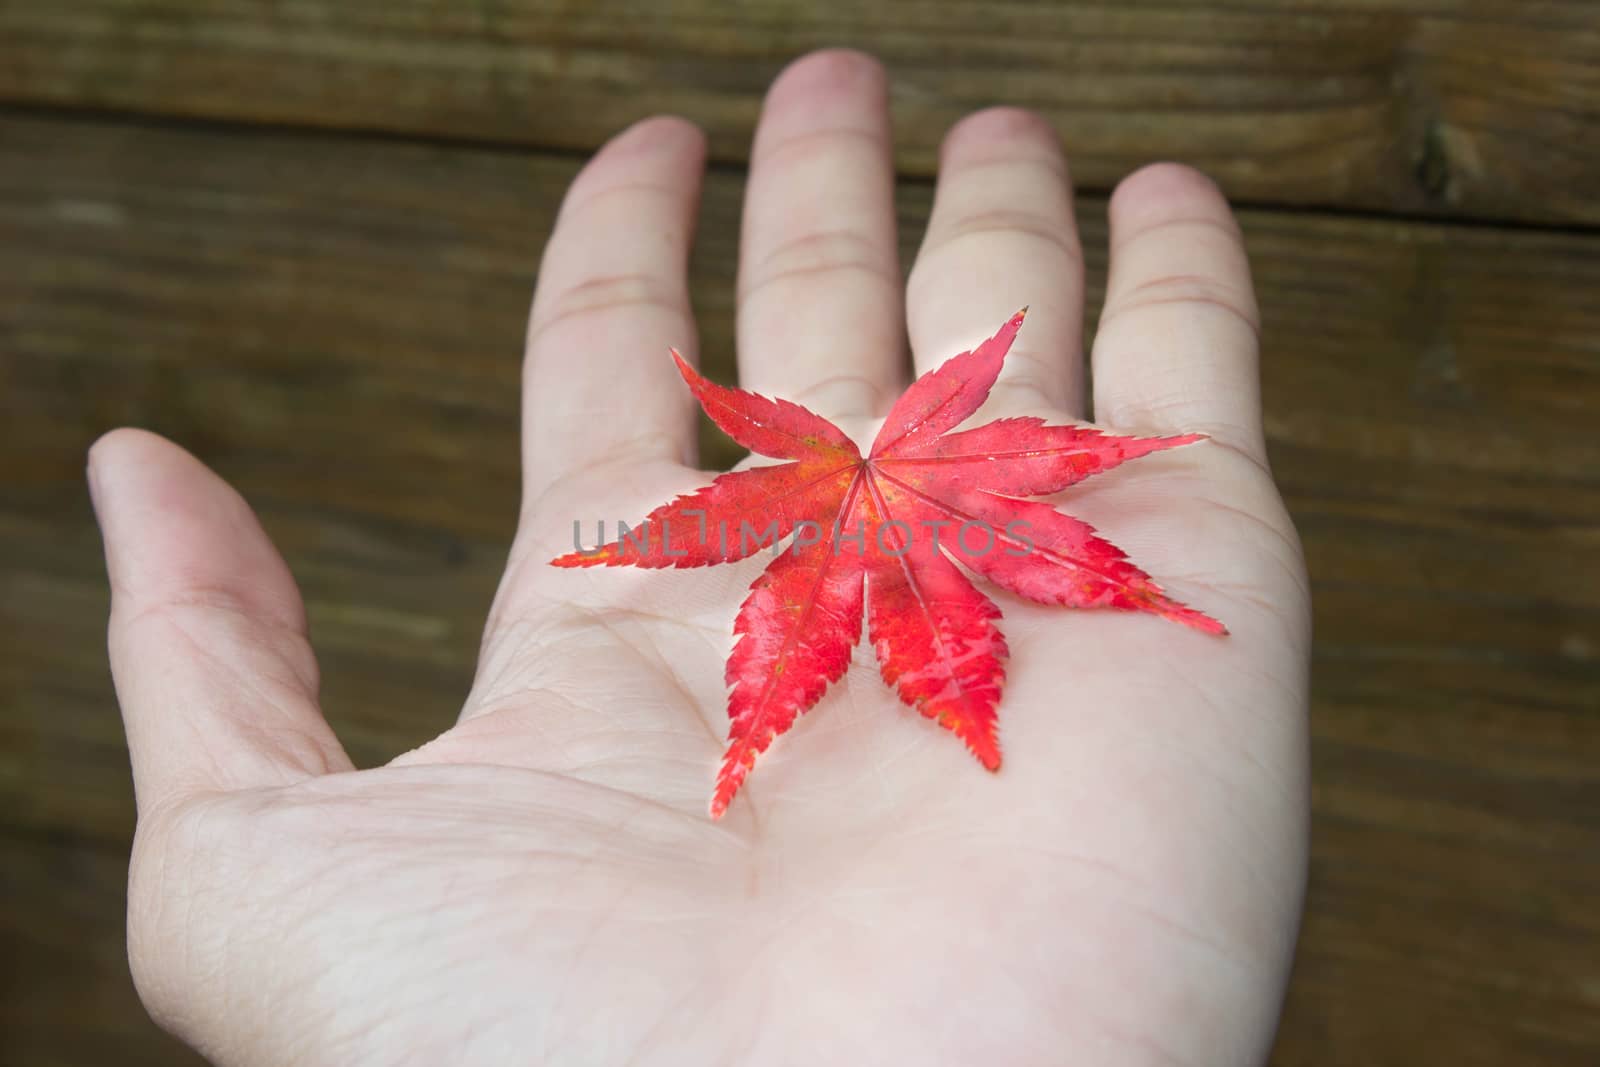 Maple Leaf on the hand by ttt1341